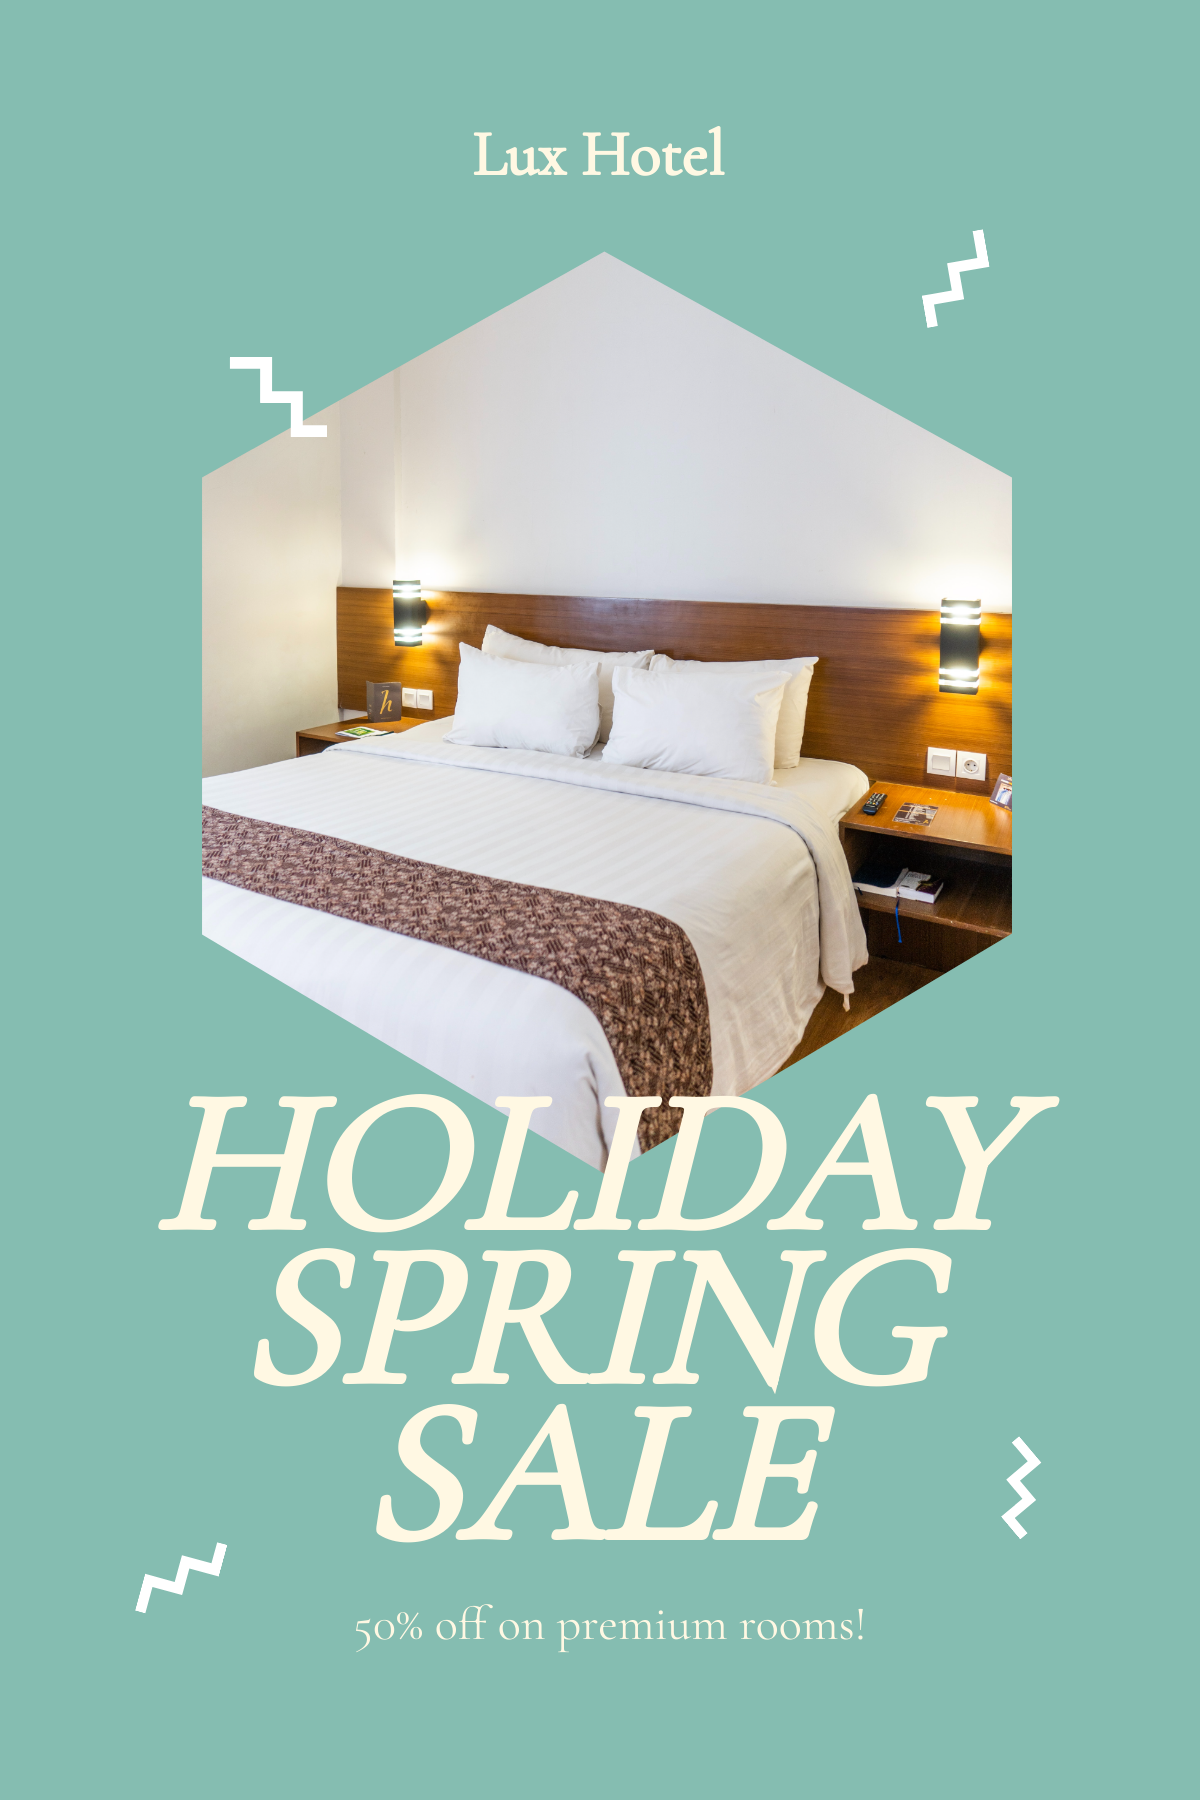 Holiday Spring Offer Sale Pinterest Pin